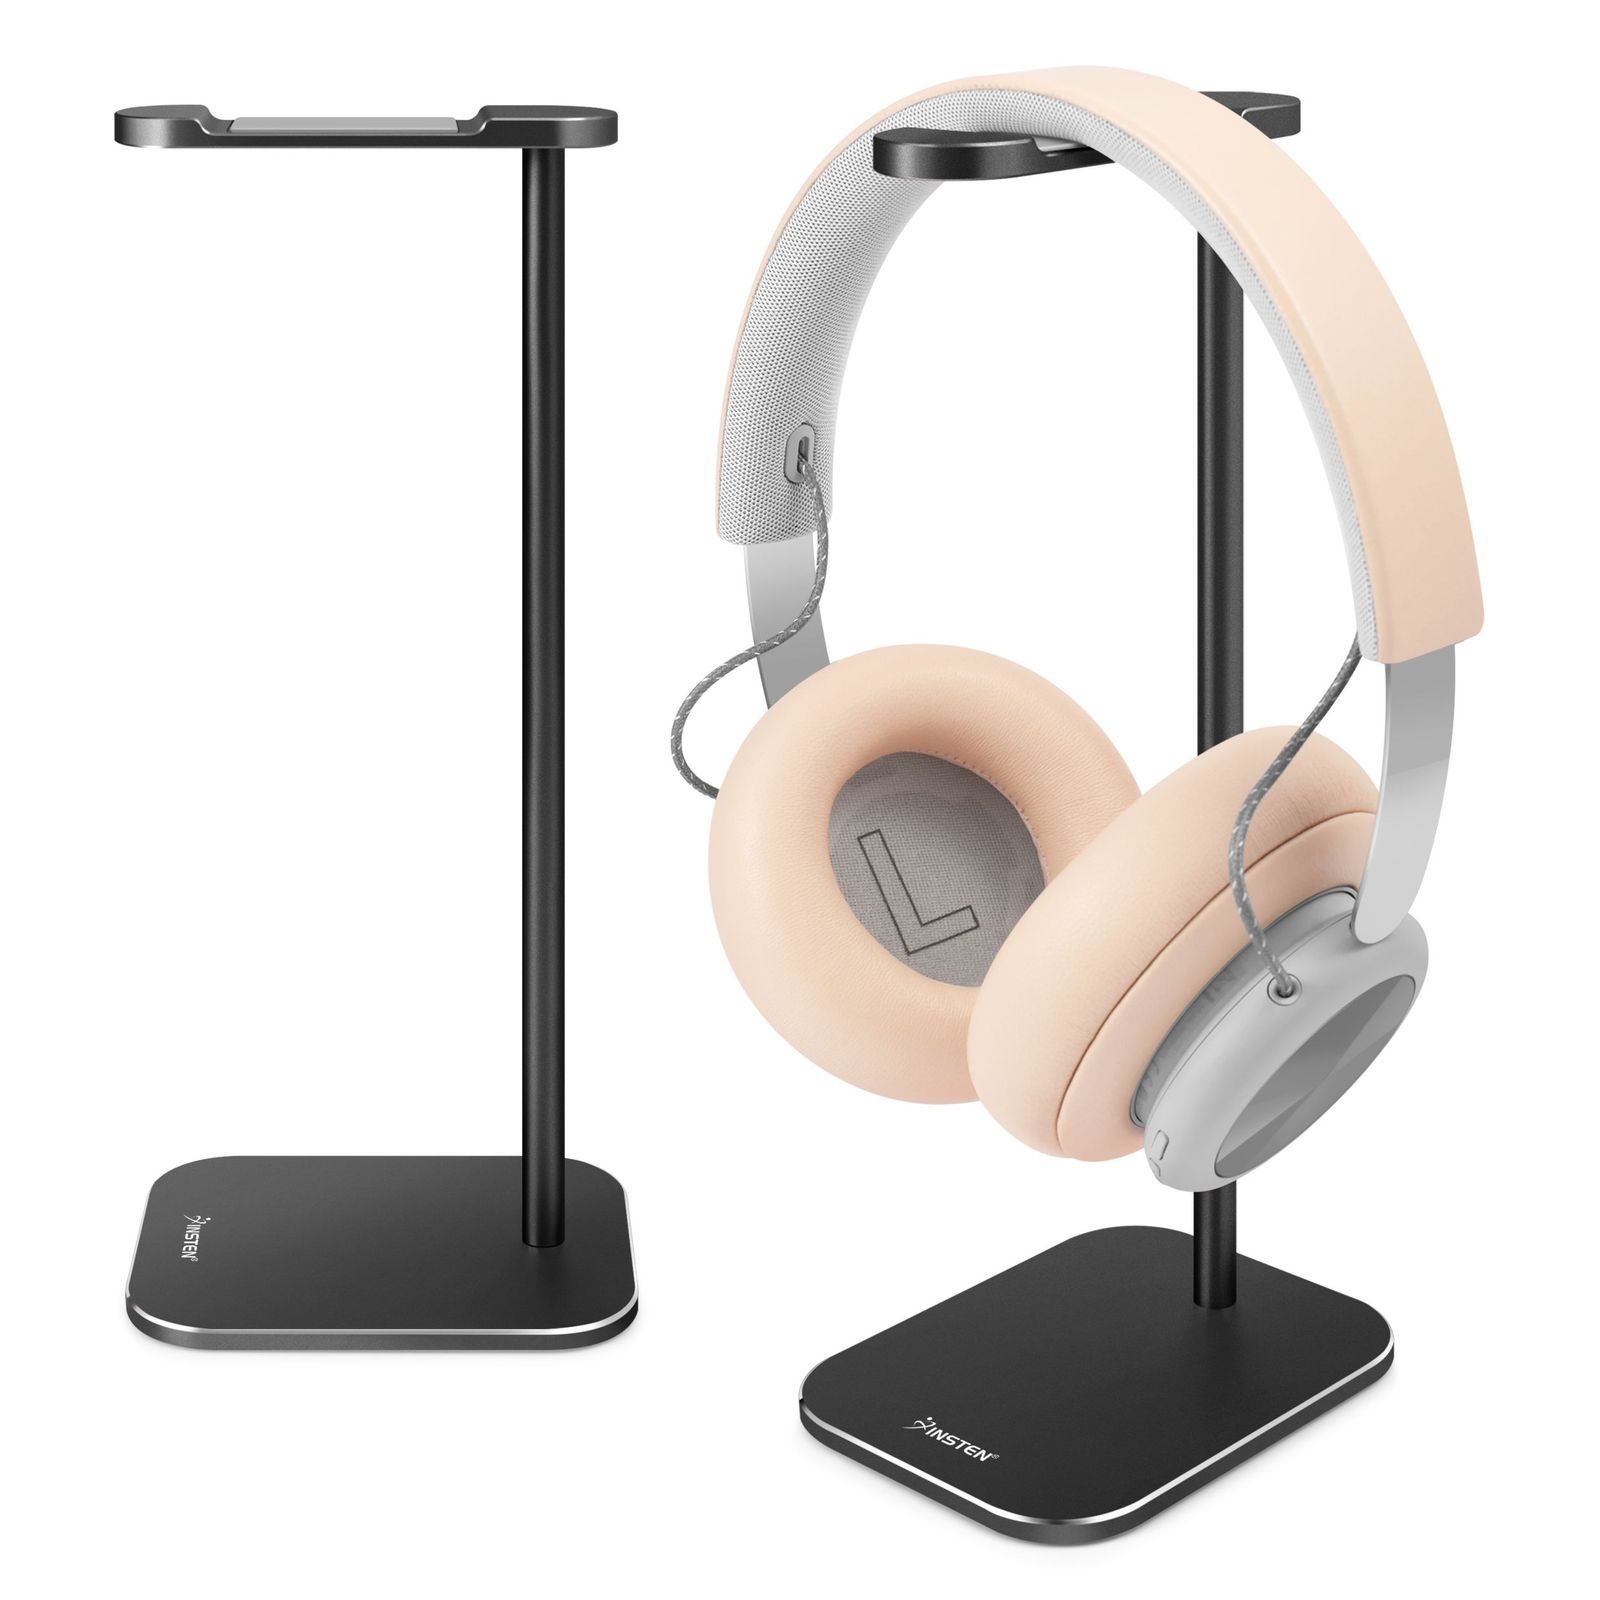 Aluminum Headset Stand for All Earphone Sizes